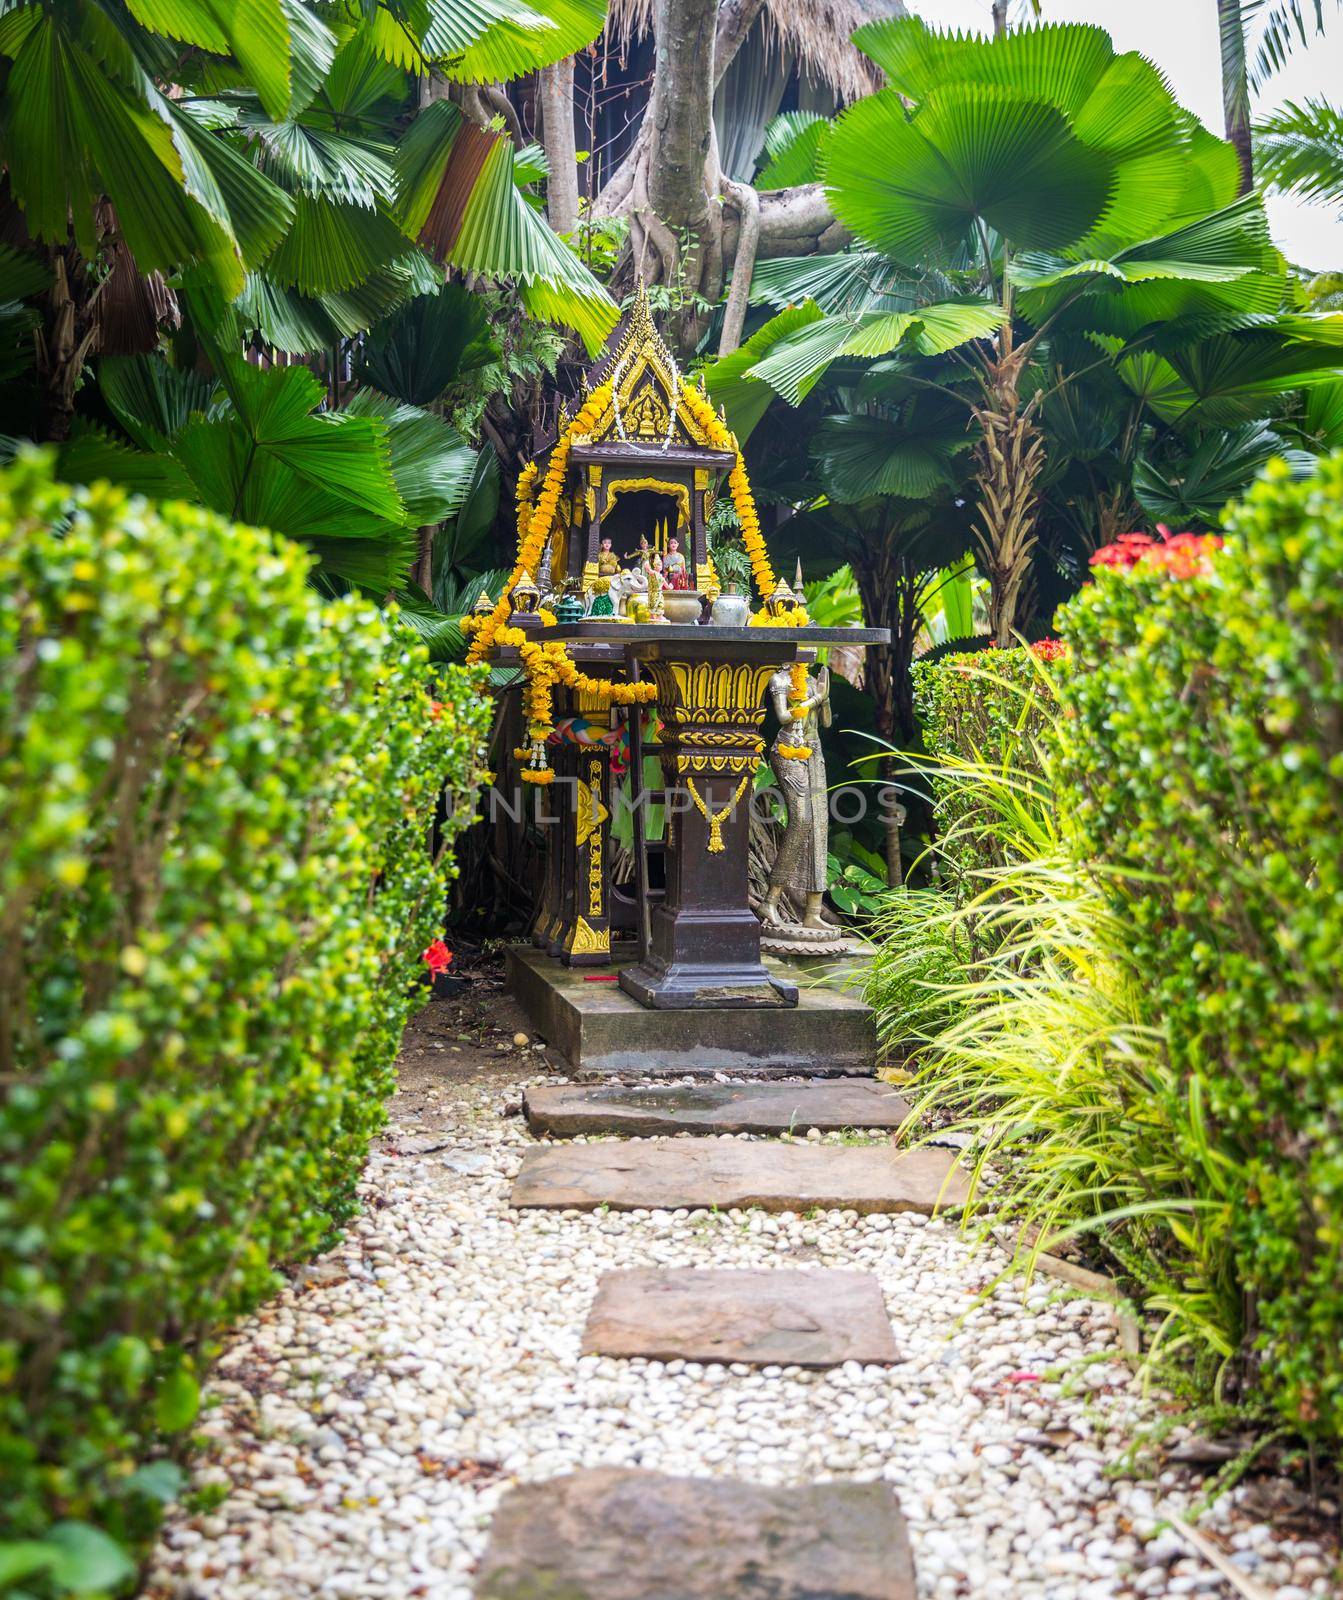 Traditional Thai spirit house with colorful garlands in Thailand